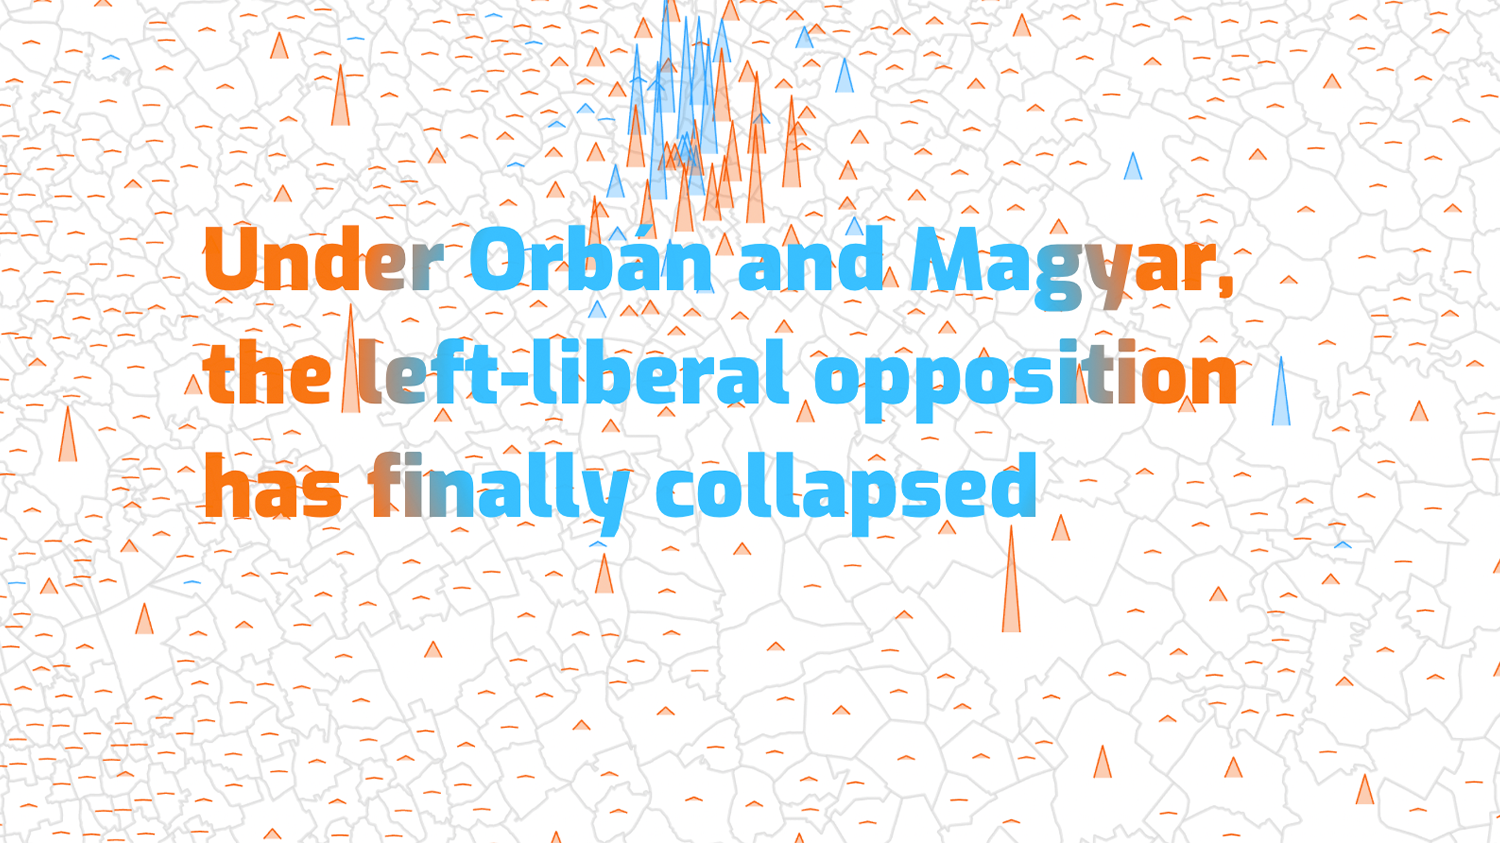 Under Orbán and Magyar, the left-liberal opposition has finally collapsed